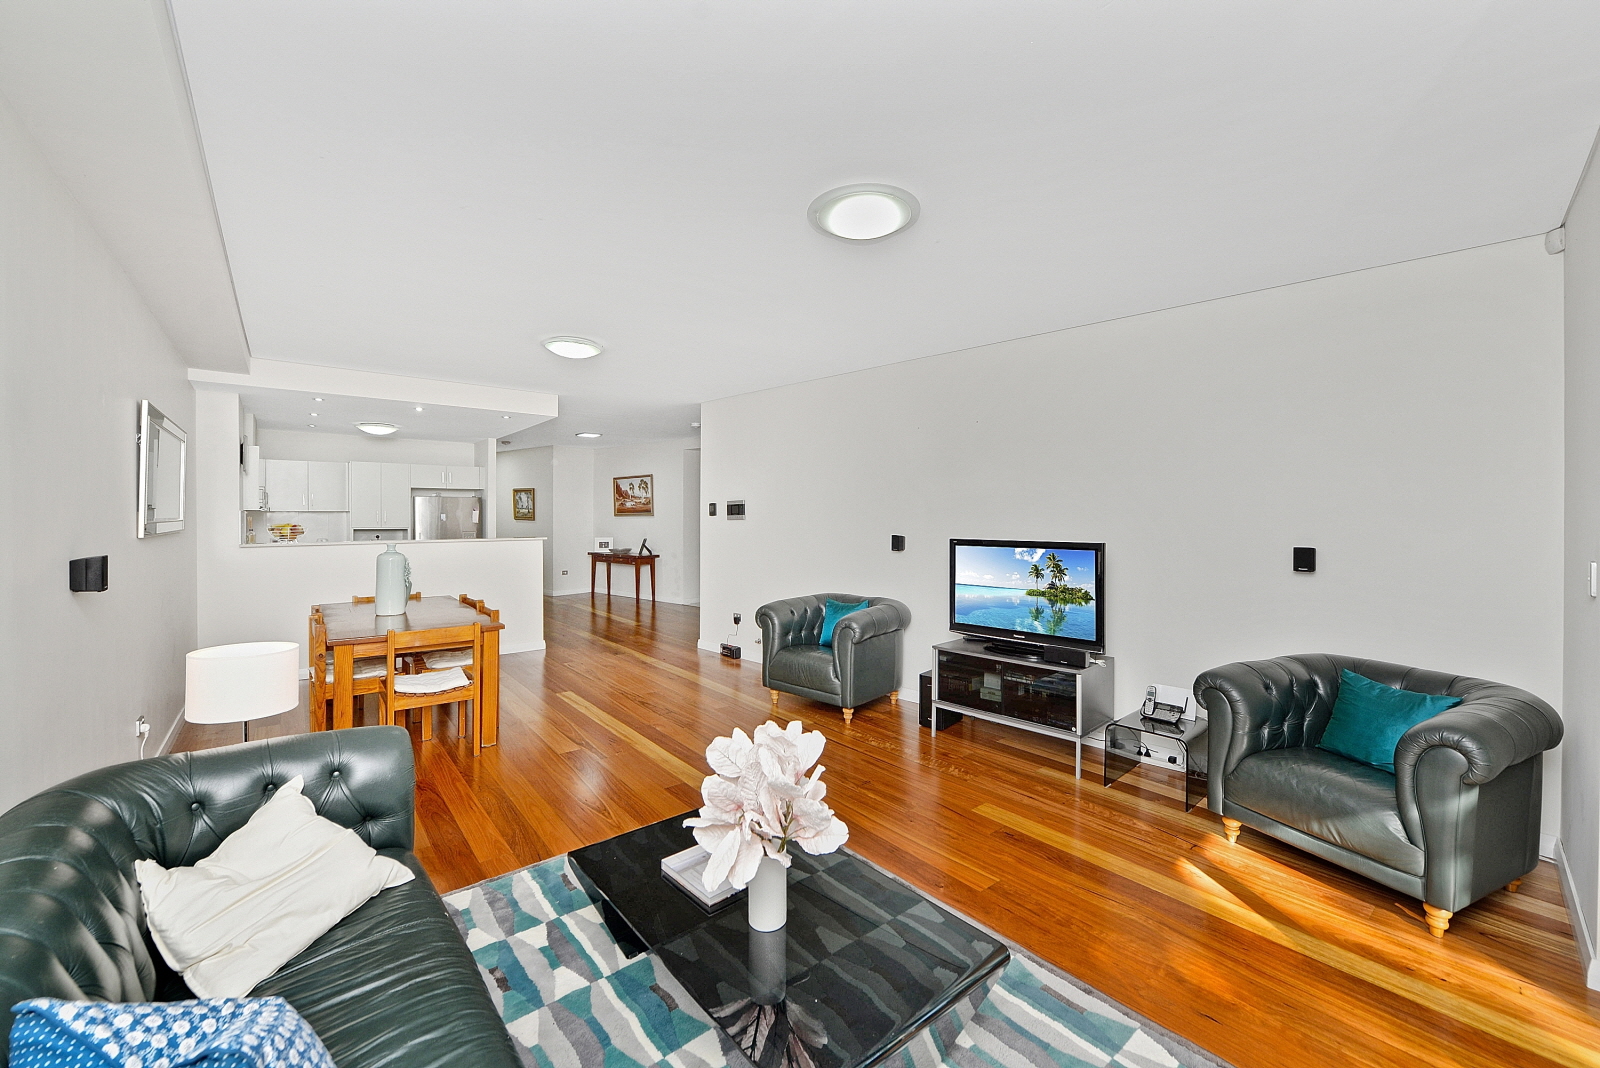 2 Bedrooms, Apartment, Sold , Mercer Street, 2 Bathrooms, Listing ID 1144, Castle Hill, NSW, Australia,